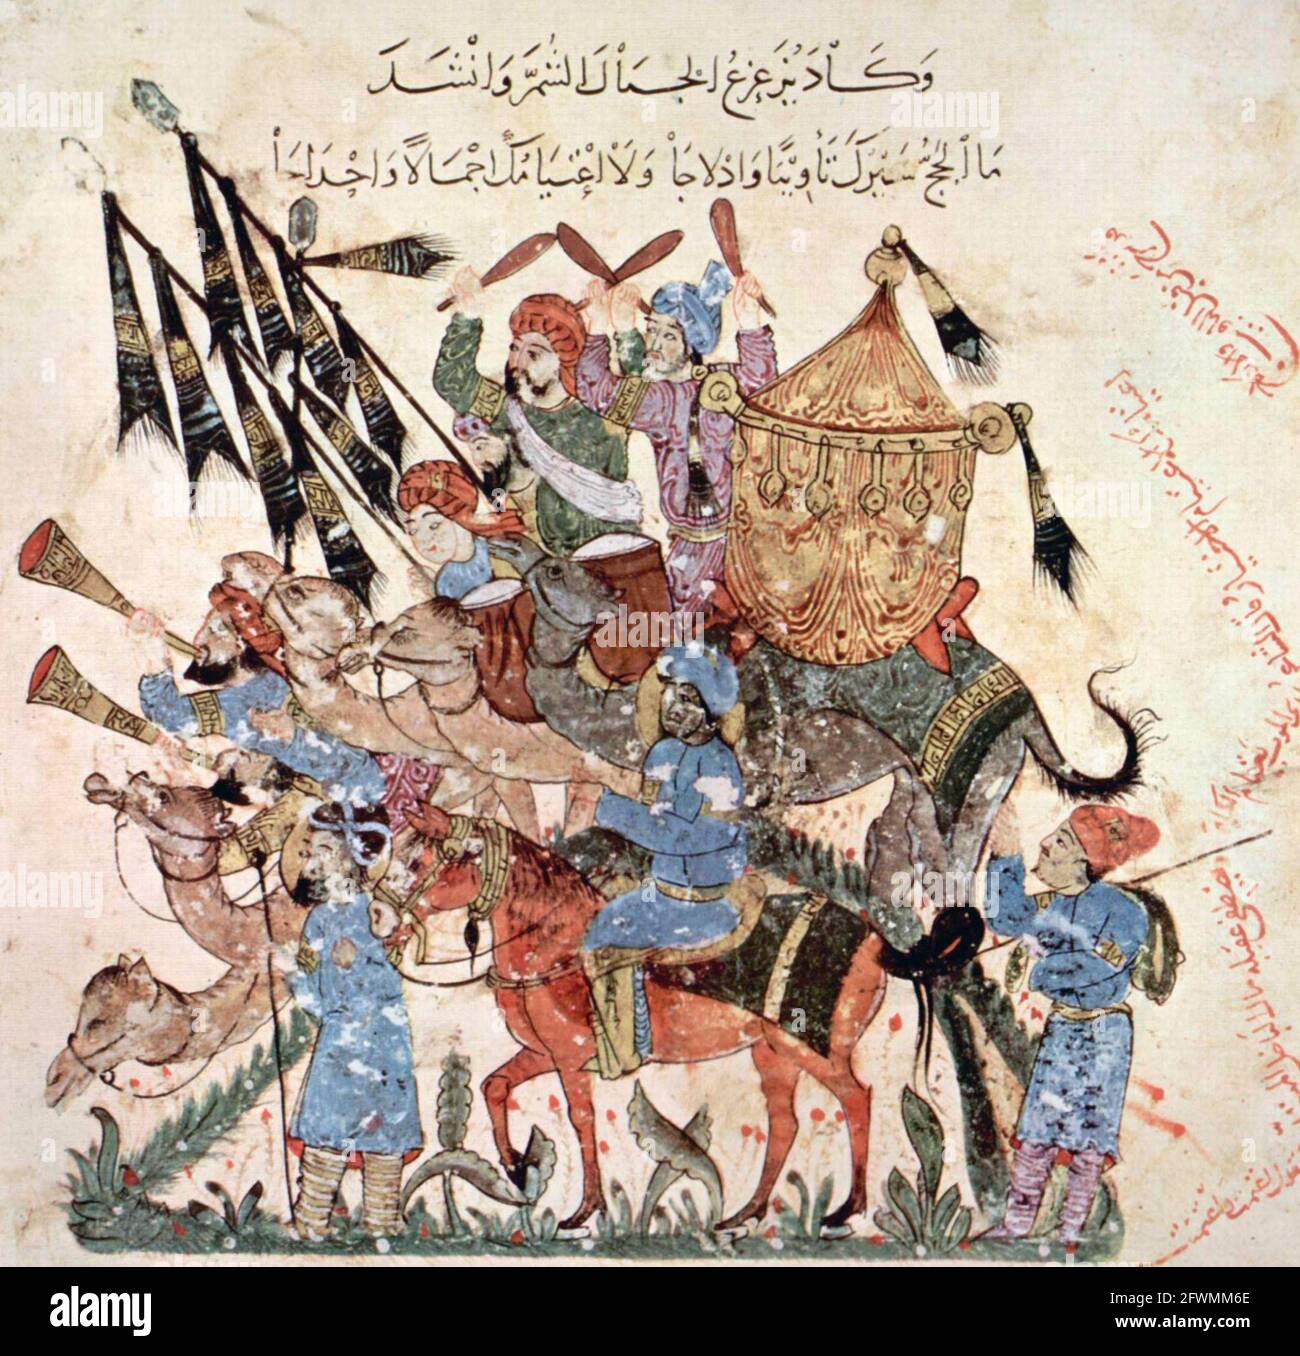 A 13th-century book illustration produced in Baghdad by al-Wasiti, showing a group of pilgrims on a hajj Stock Photo